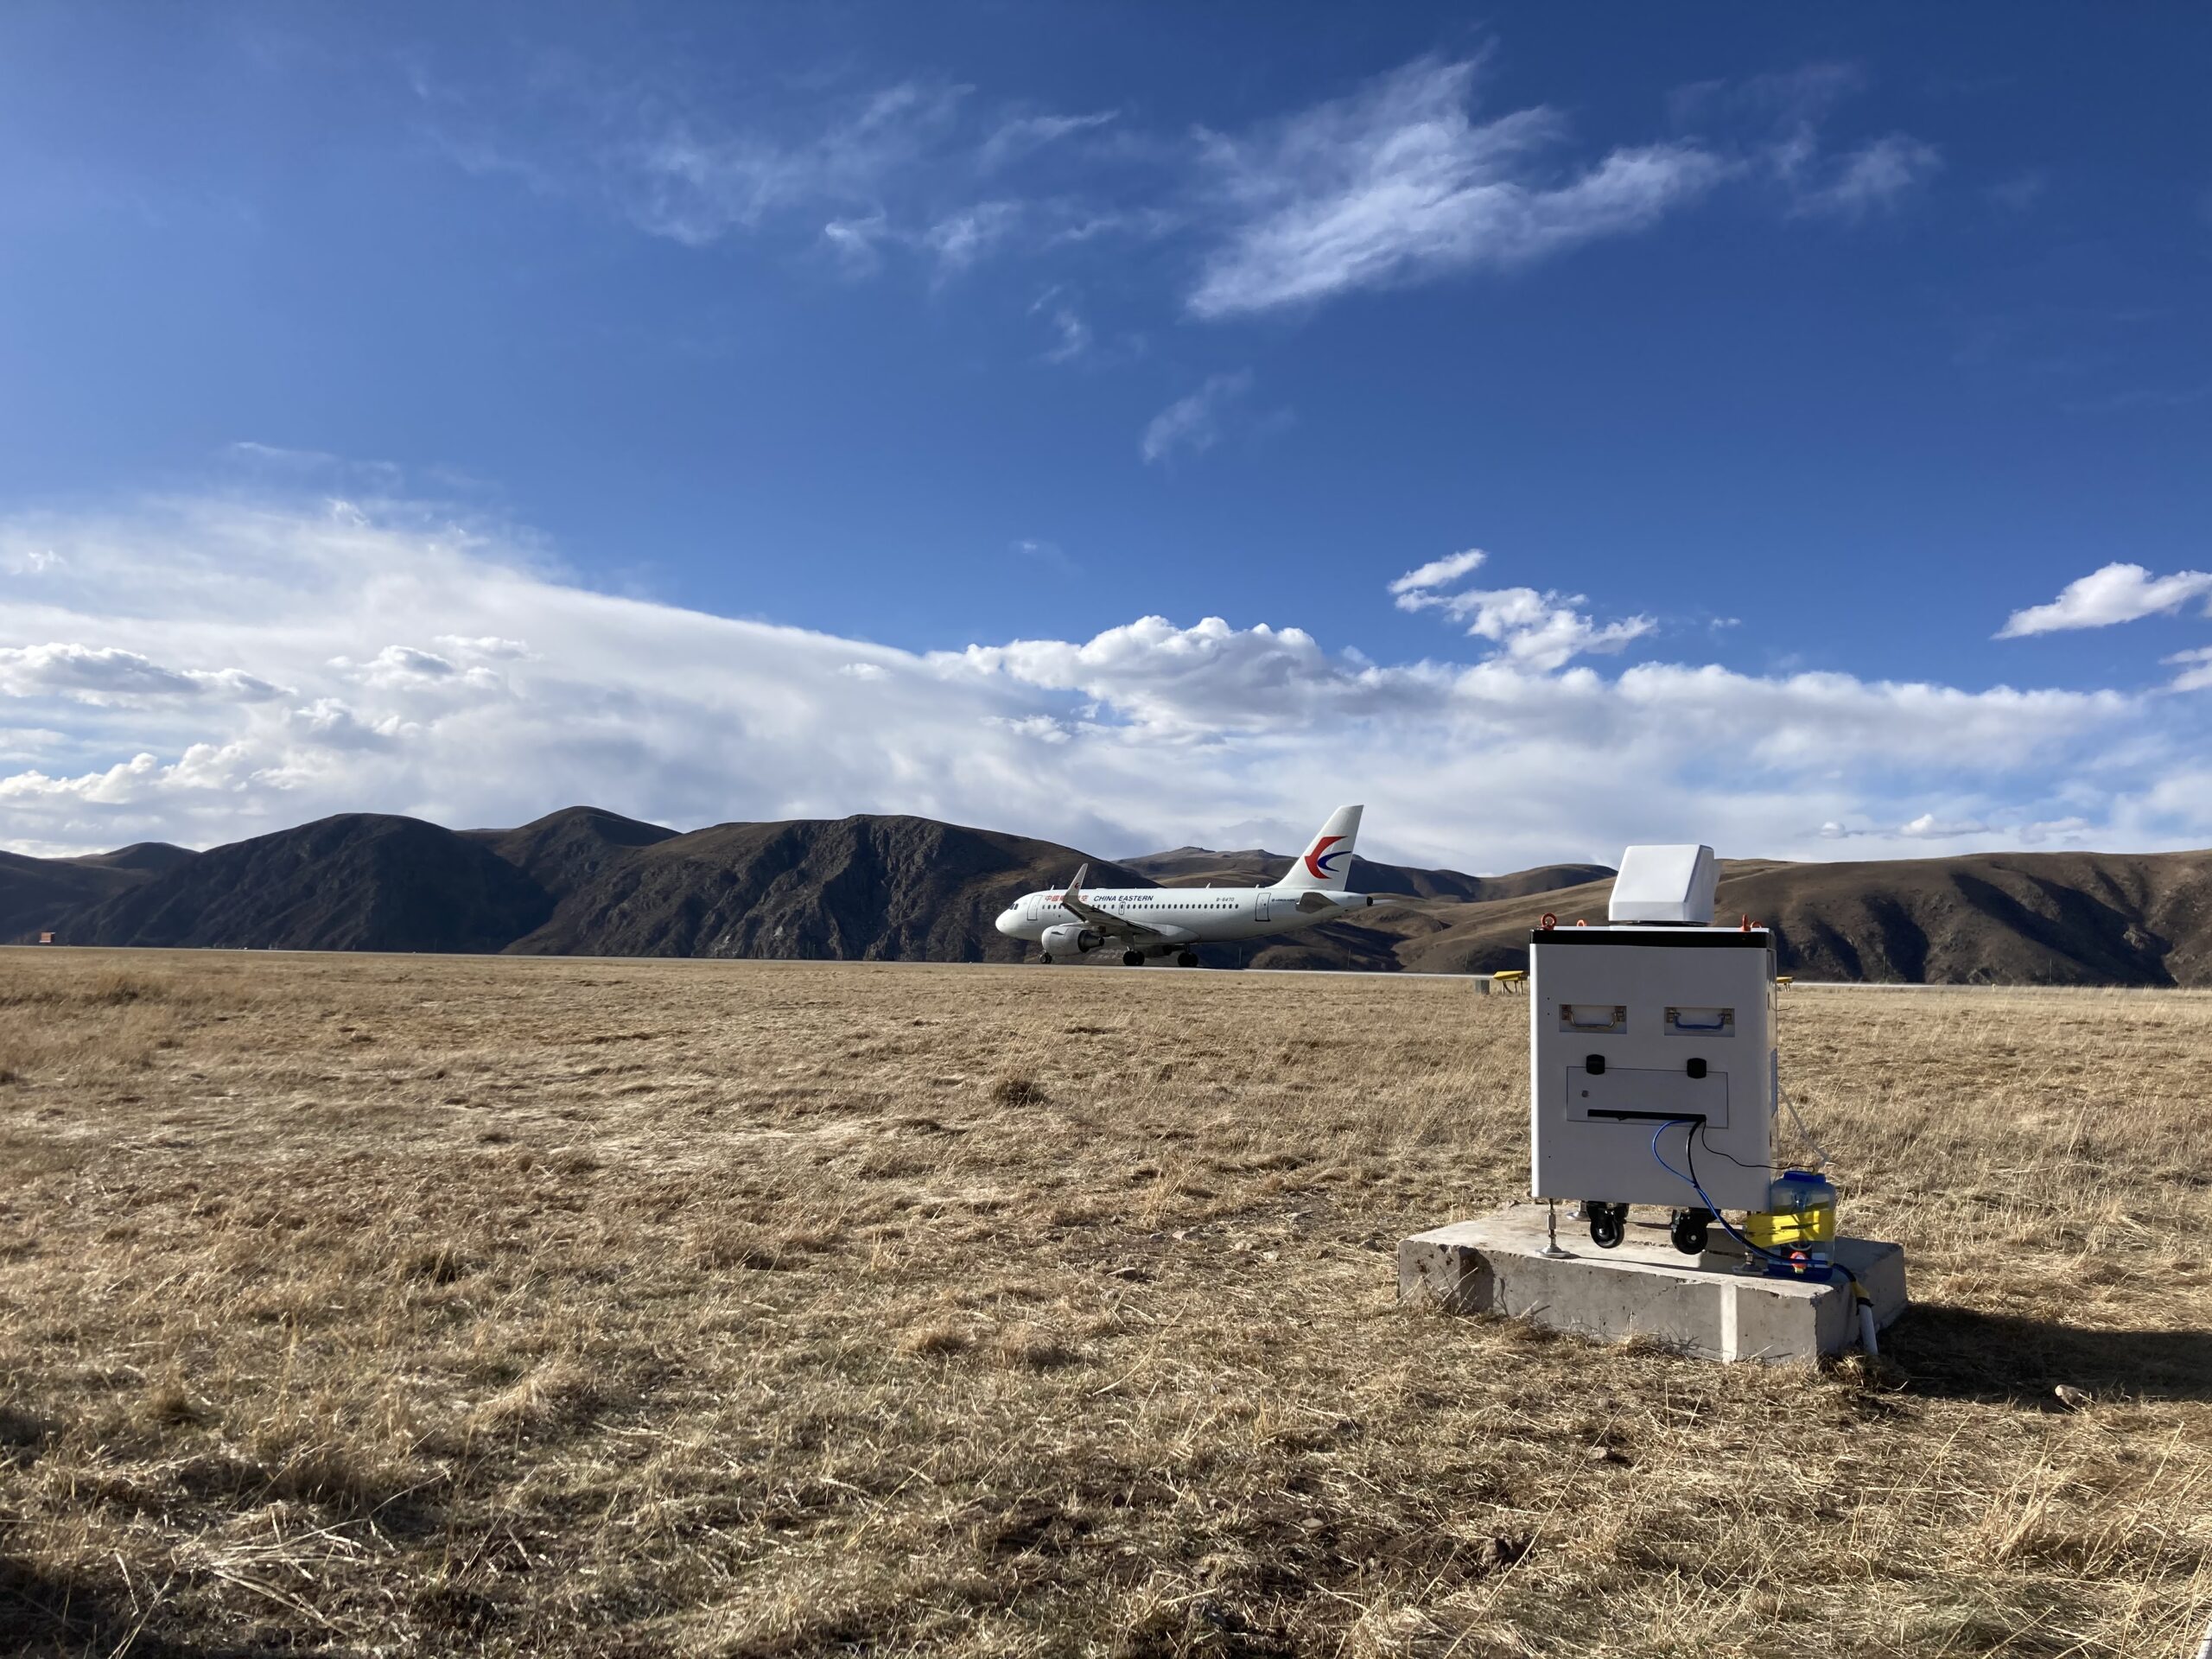 Molas 3D Doppler Scanning Wind LiDAR Improves The Civil Aviation Safety and Efficiency